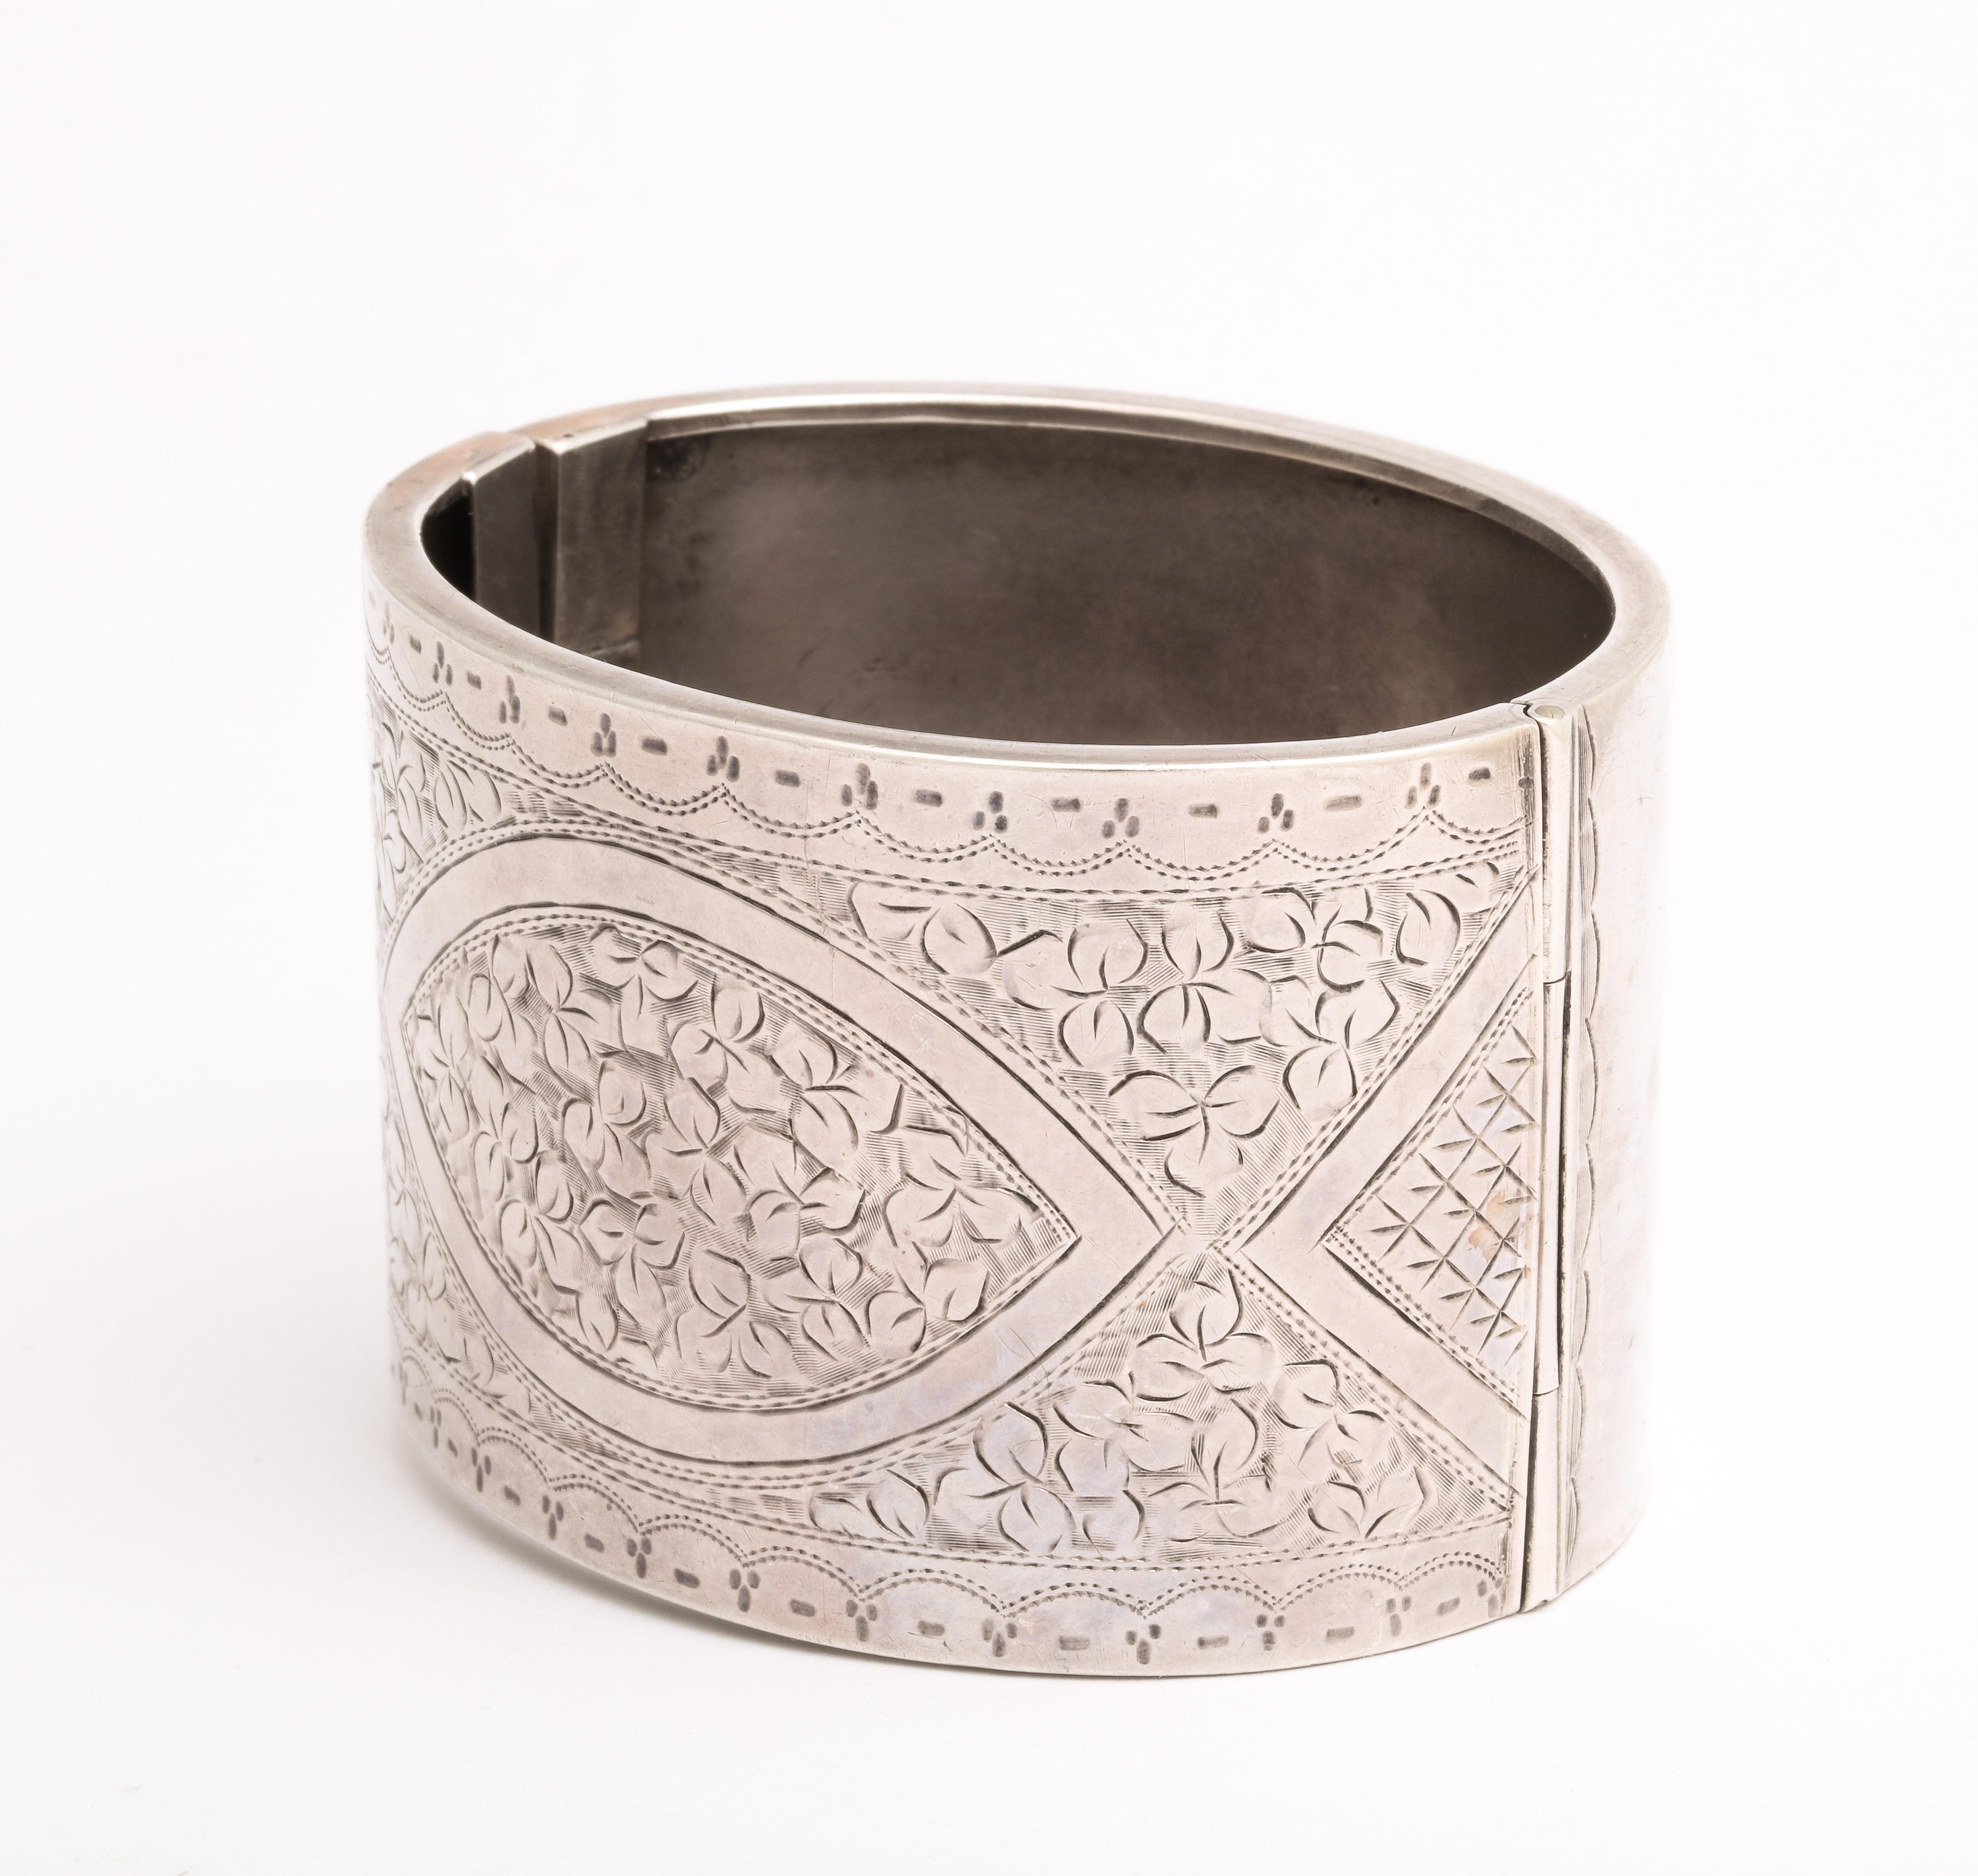 During the 1860's through the 1880's silver bracelets such as this ivy leaf engraved wide cuff were everywhere in Europe. I call the period the silver rush in England where most of these cuffs were made in a plethora of patters with beautiful hand